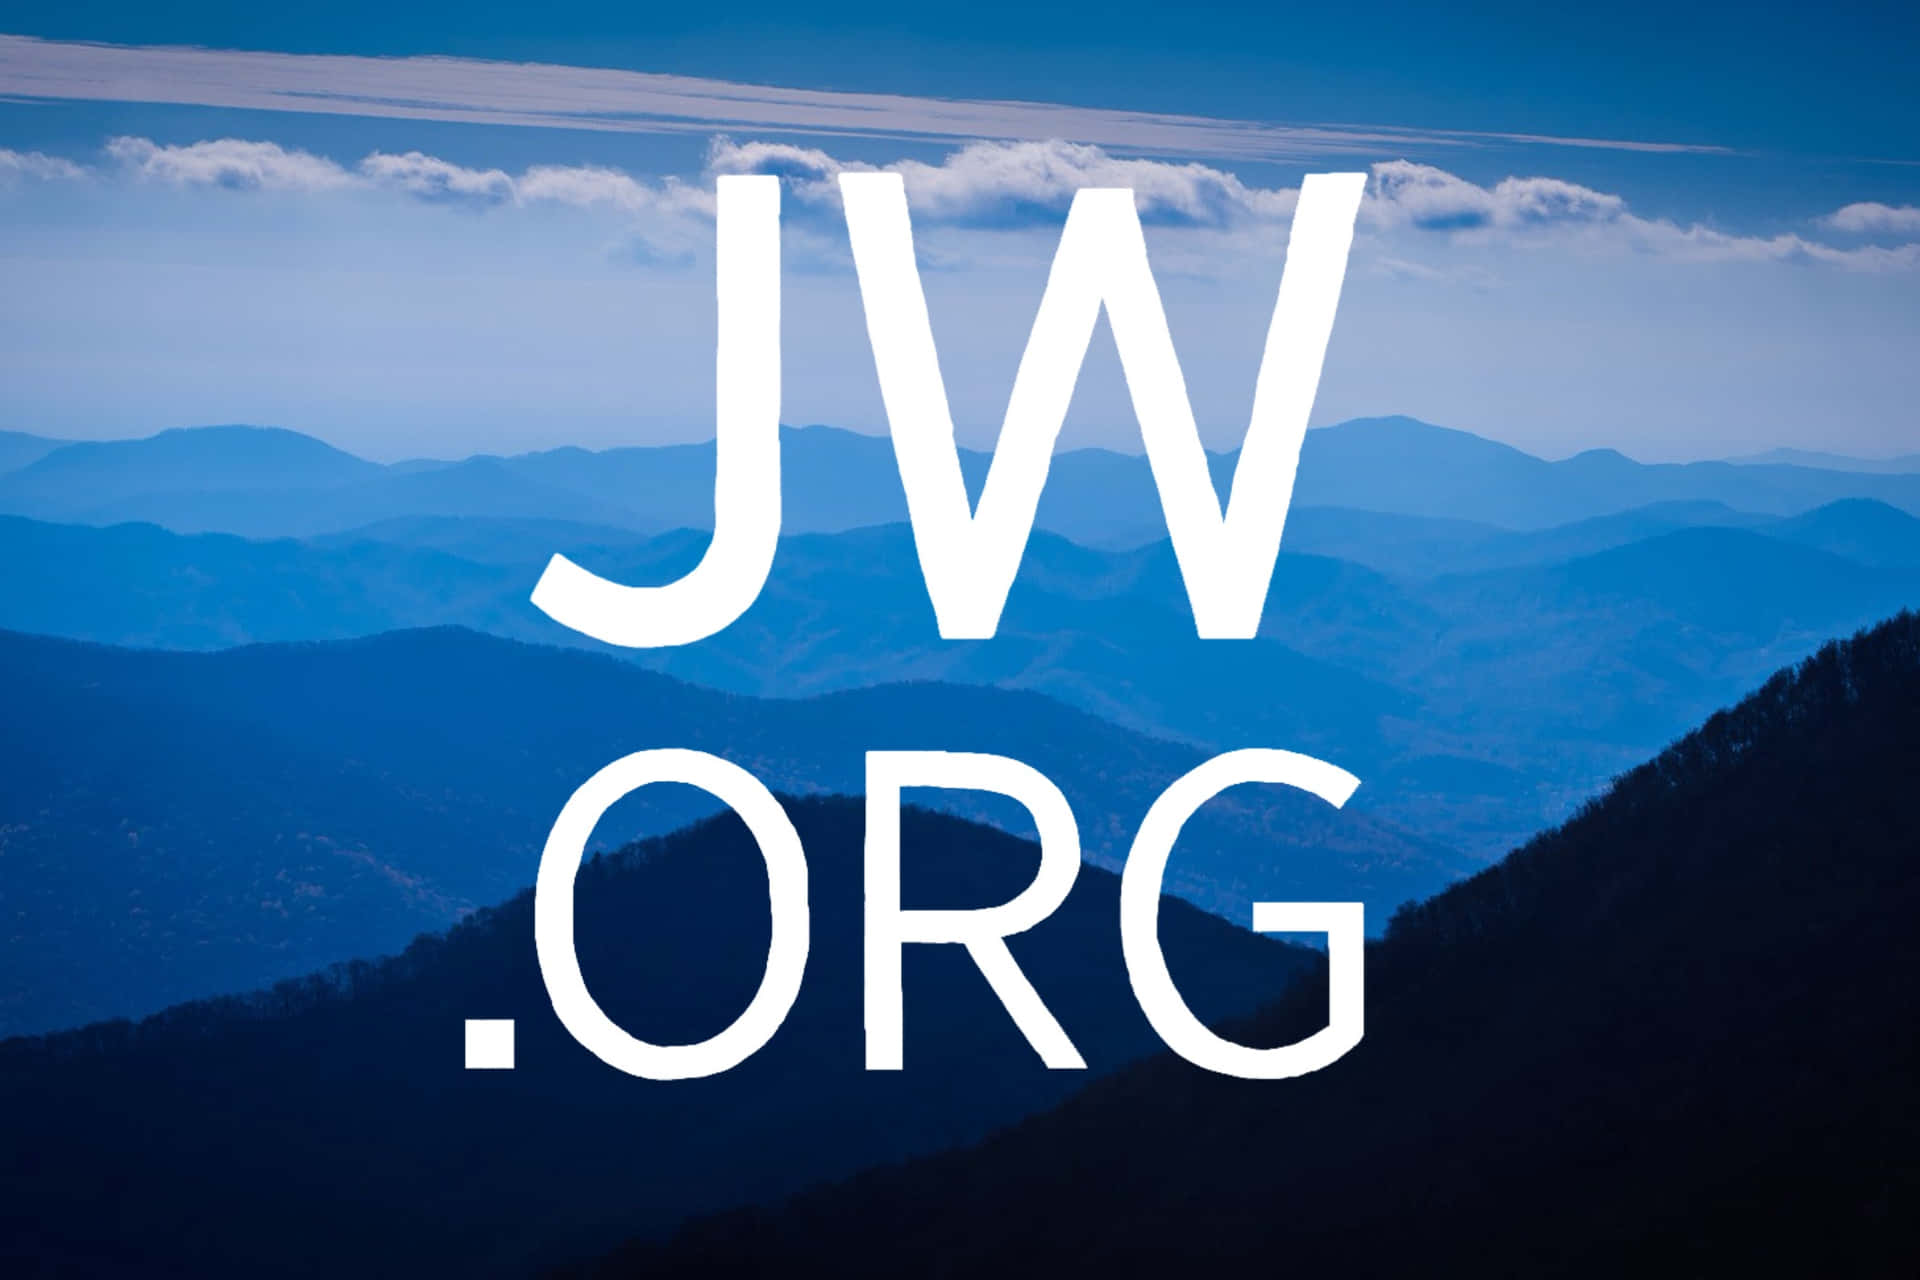 Caption: Peaceful Scenery with JWORG Logo Wallpaper